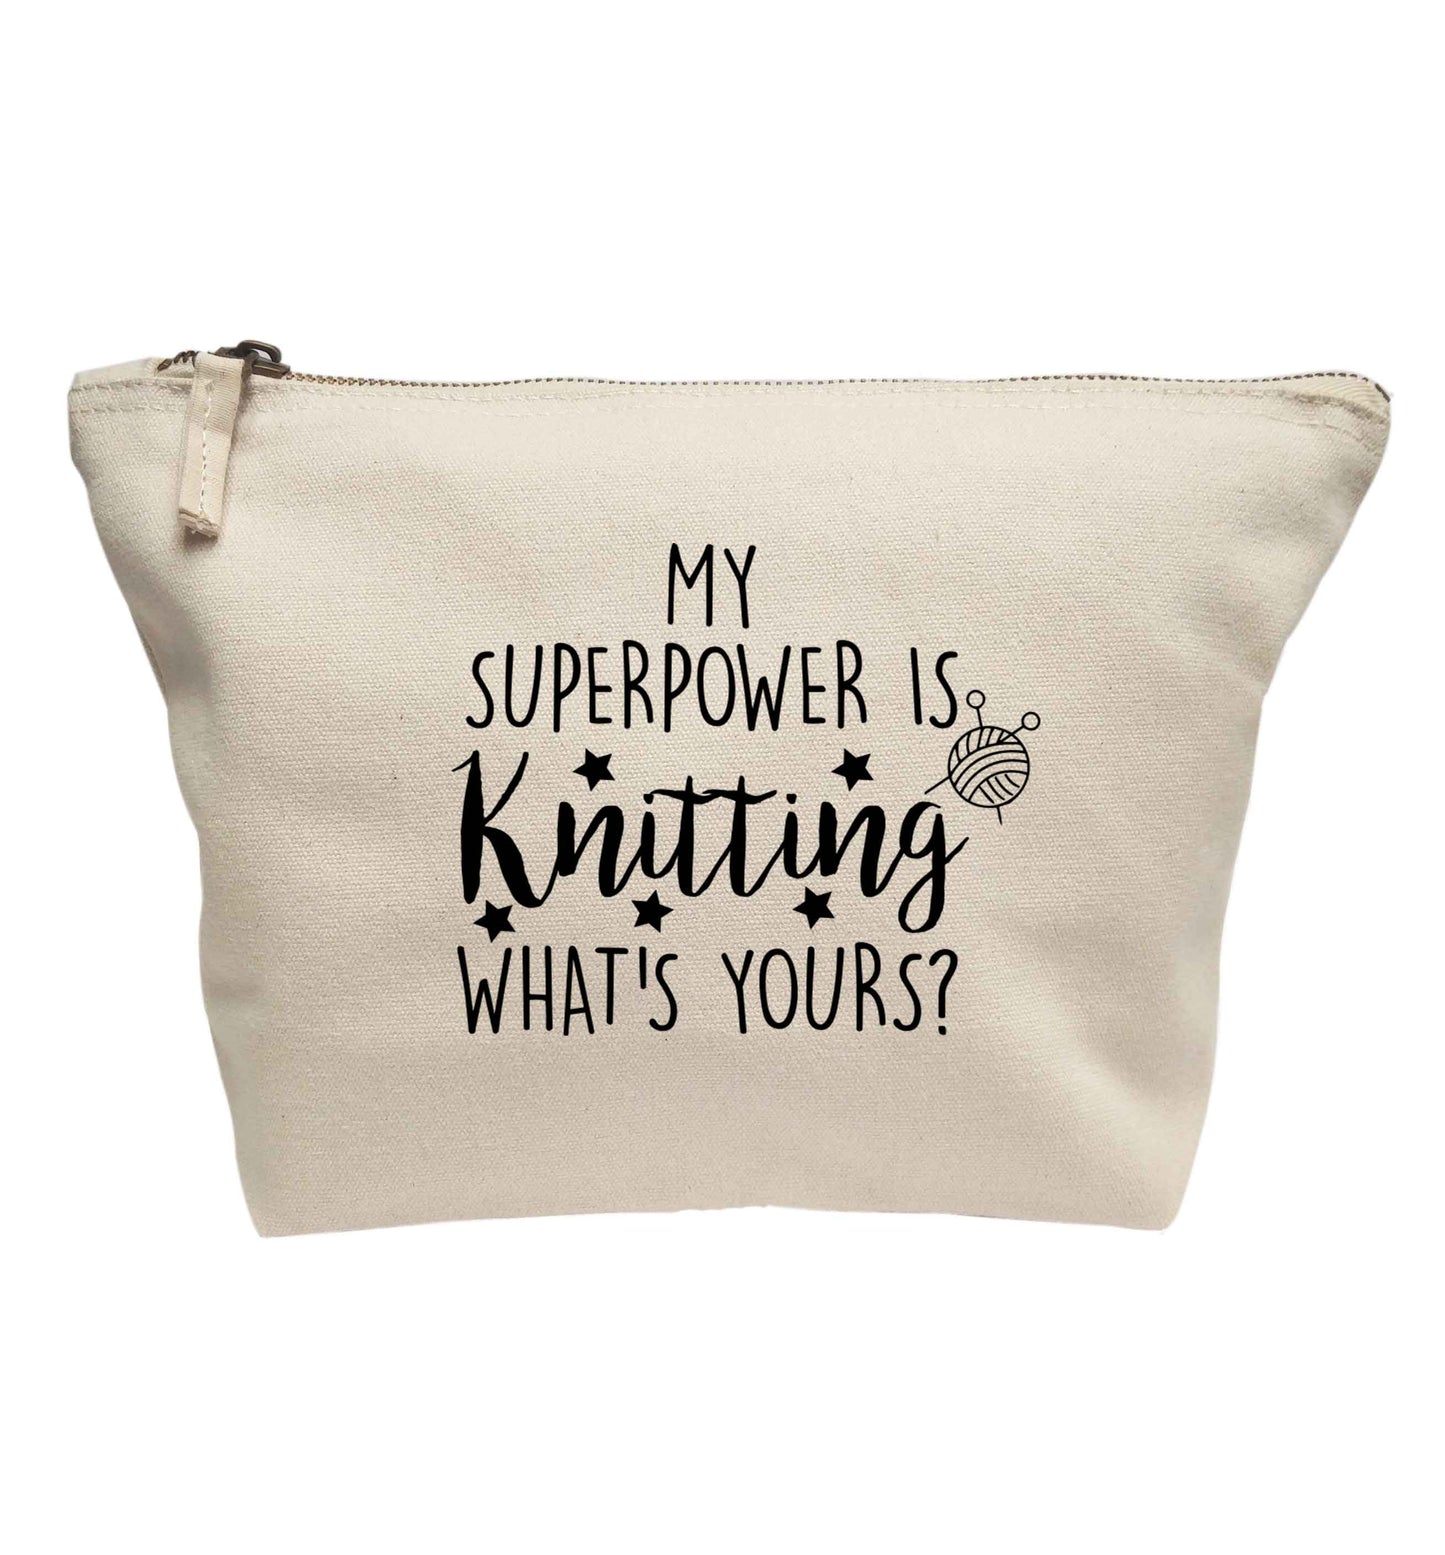 My superpower is knitting what's yours? | Makeup / wash bag